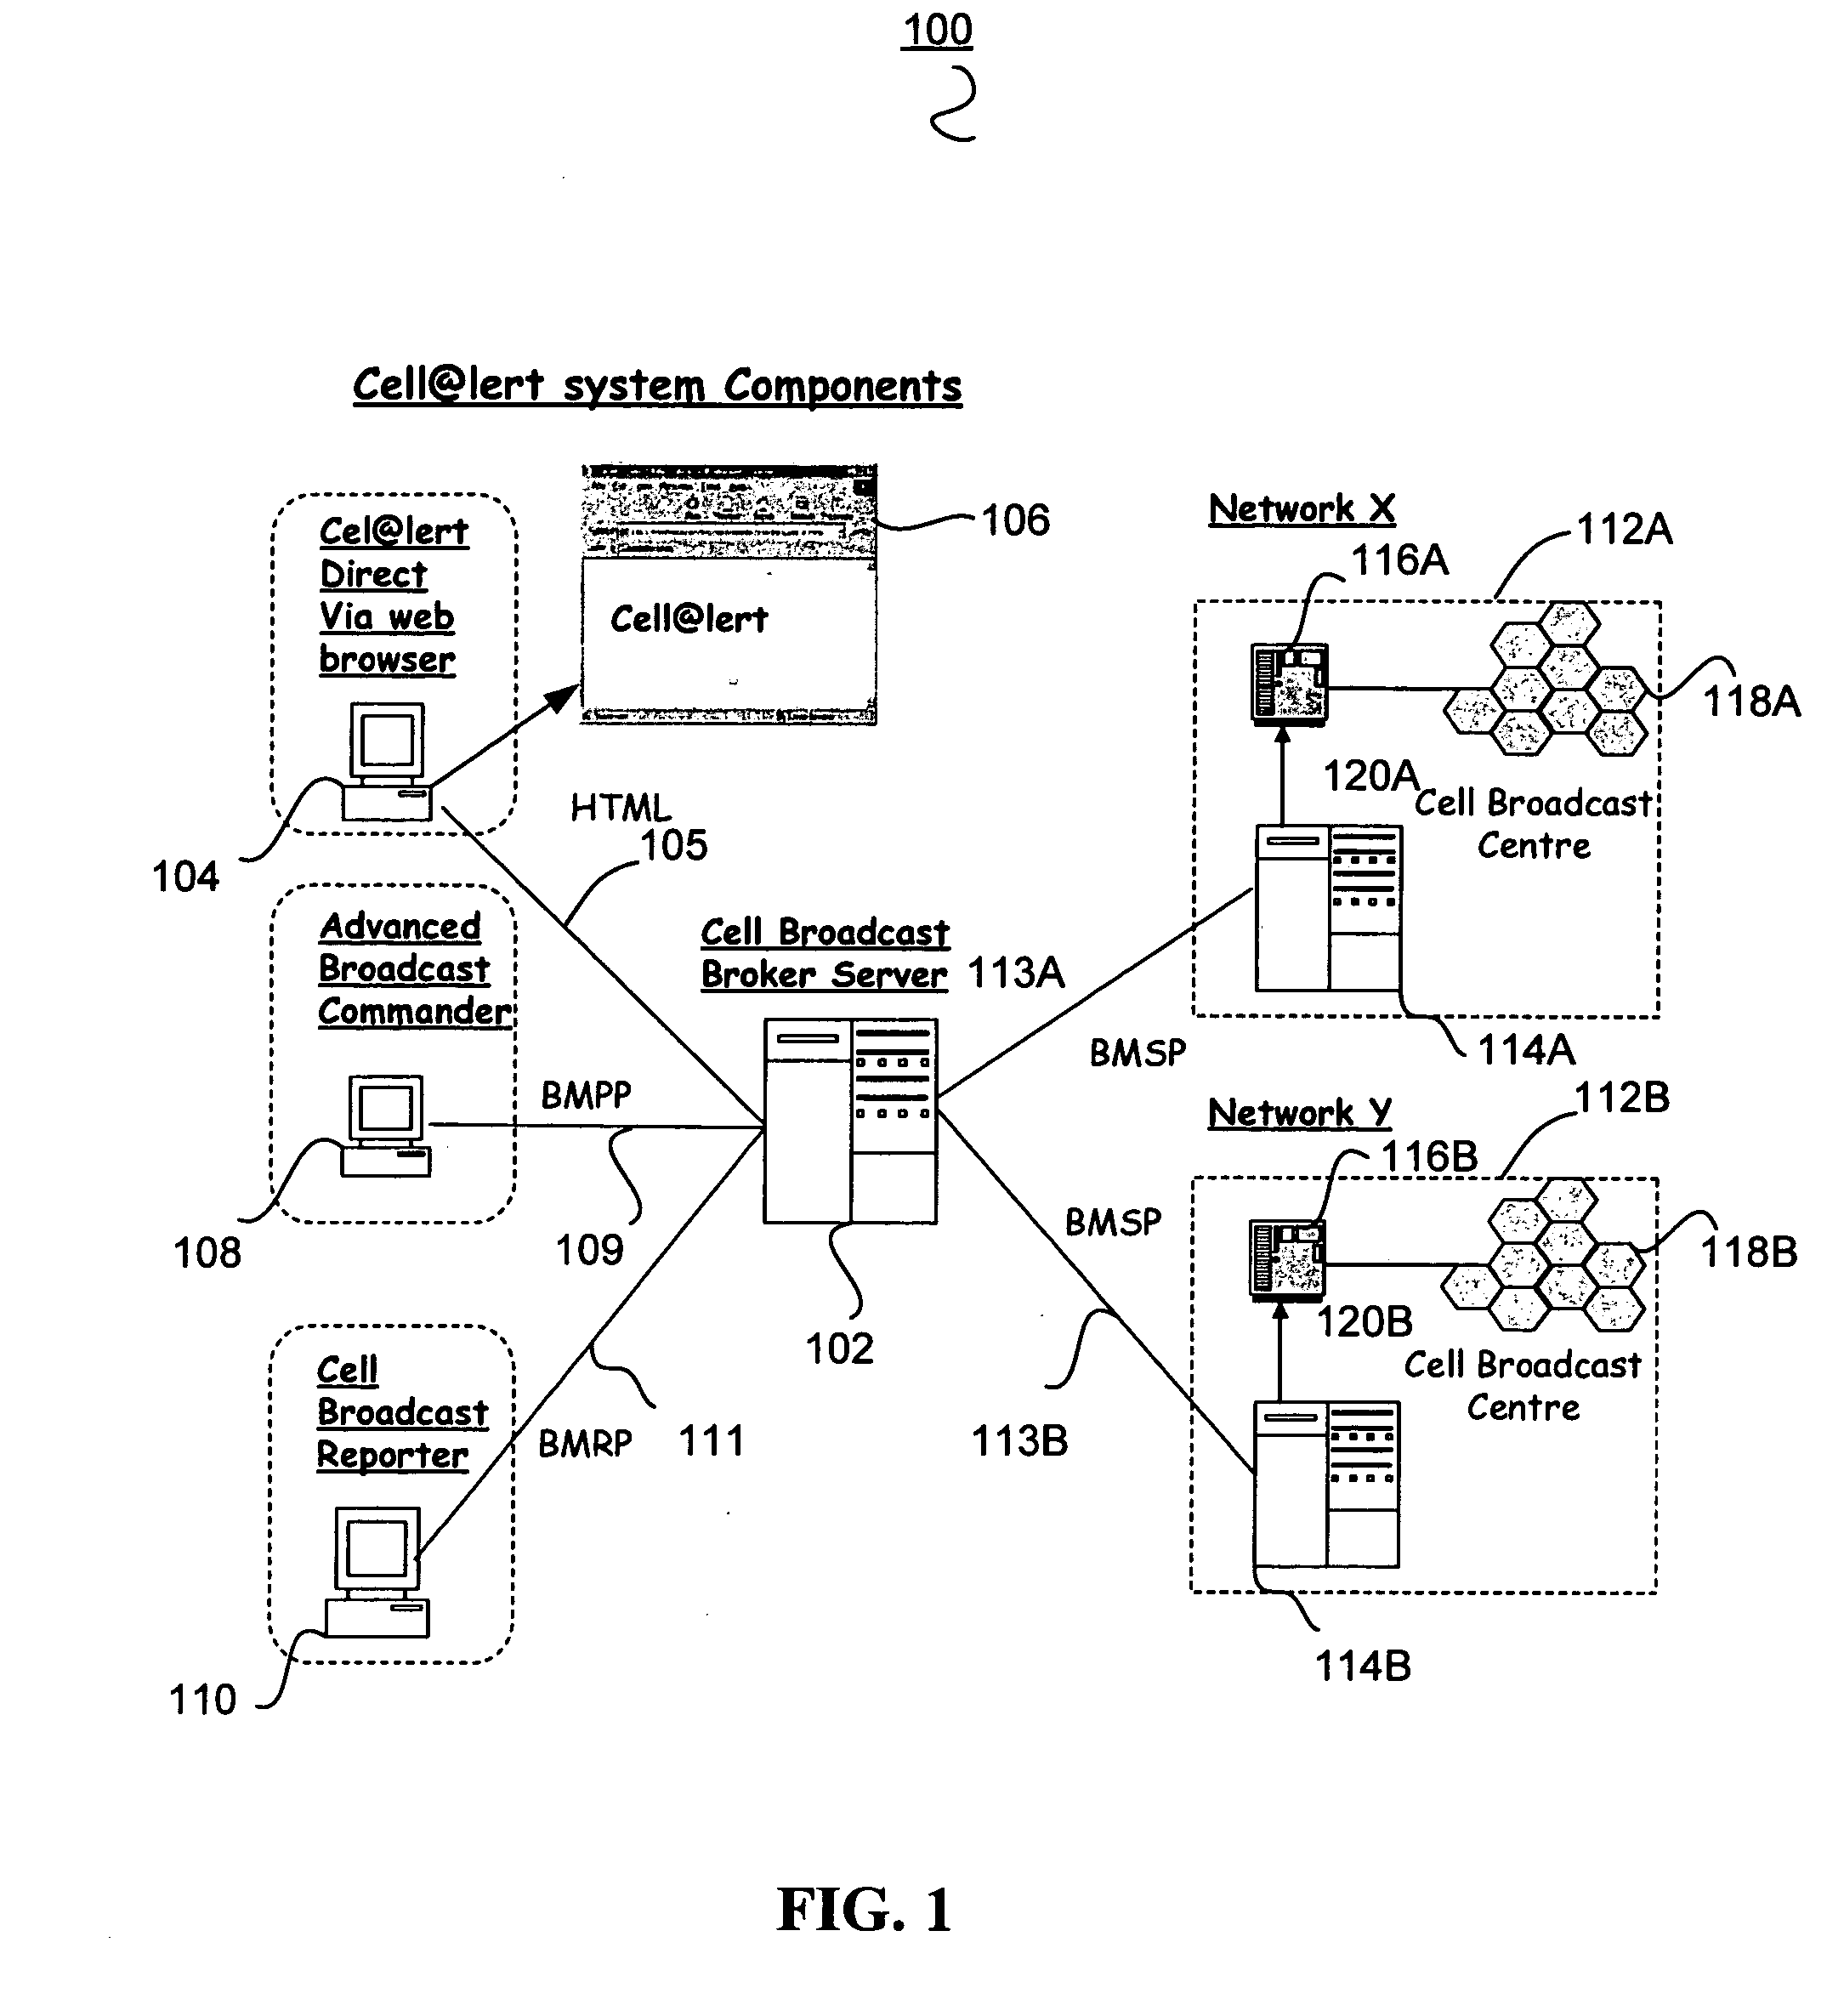 Public service message broadcasting system and method